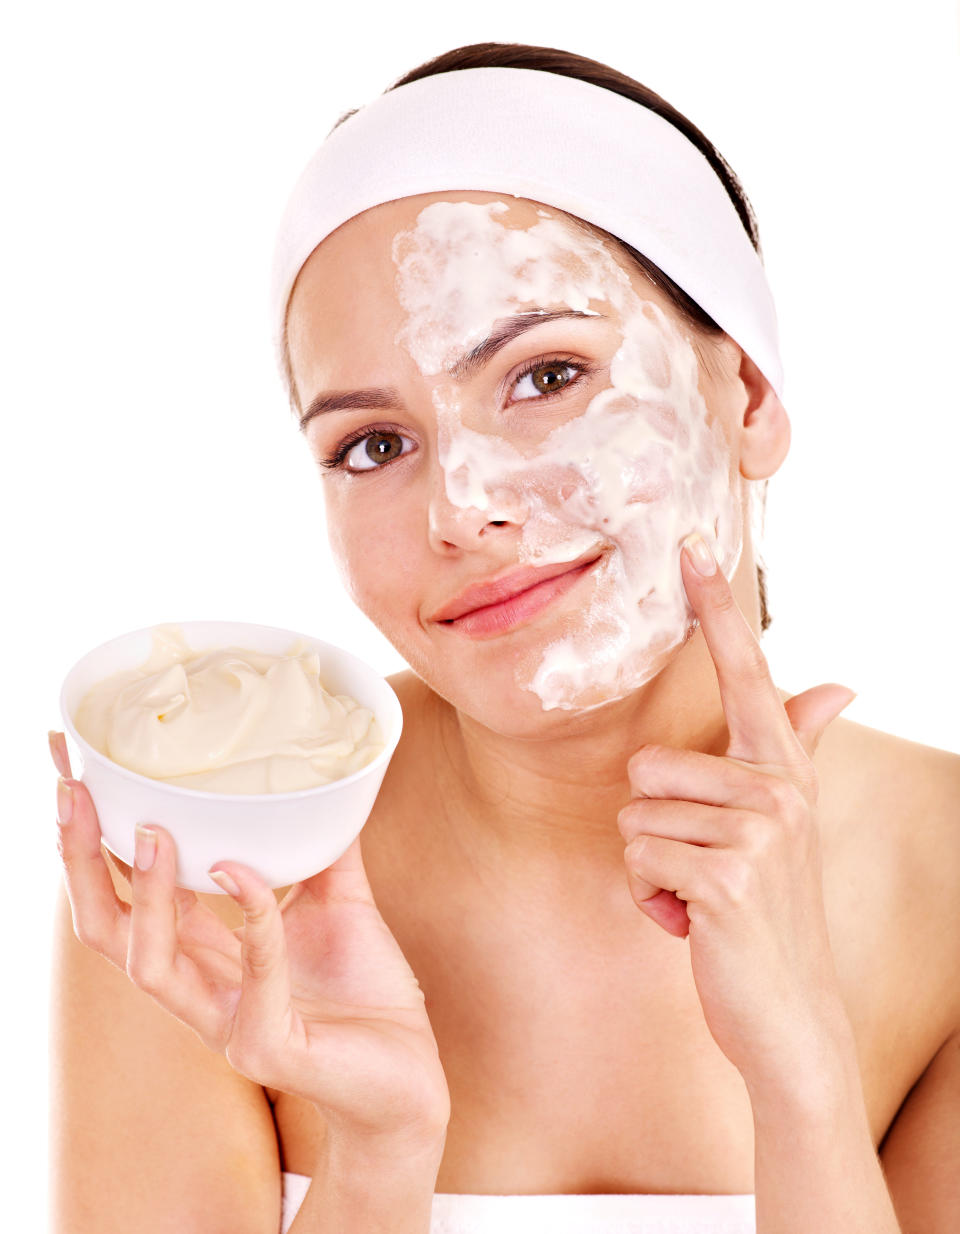 Exfoliating definitely has skin benefits: The scrub can increase circulation for a rosy glow, and it helps to remove dead skin cells. But <em>excessive</em> exfoliation can “lead down the path to trouble.” Krant recommends a gentle exfoliation one or twice a week, max. 